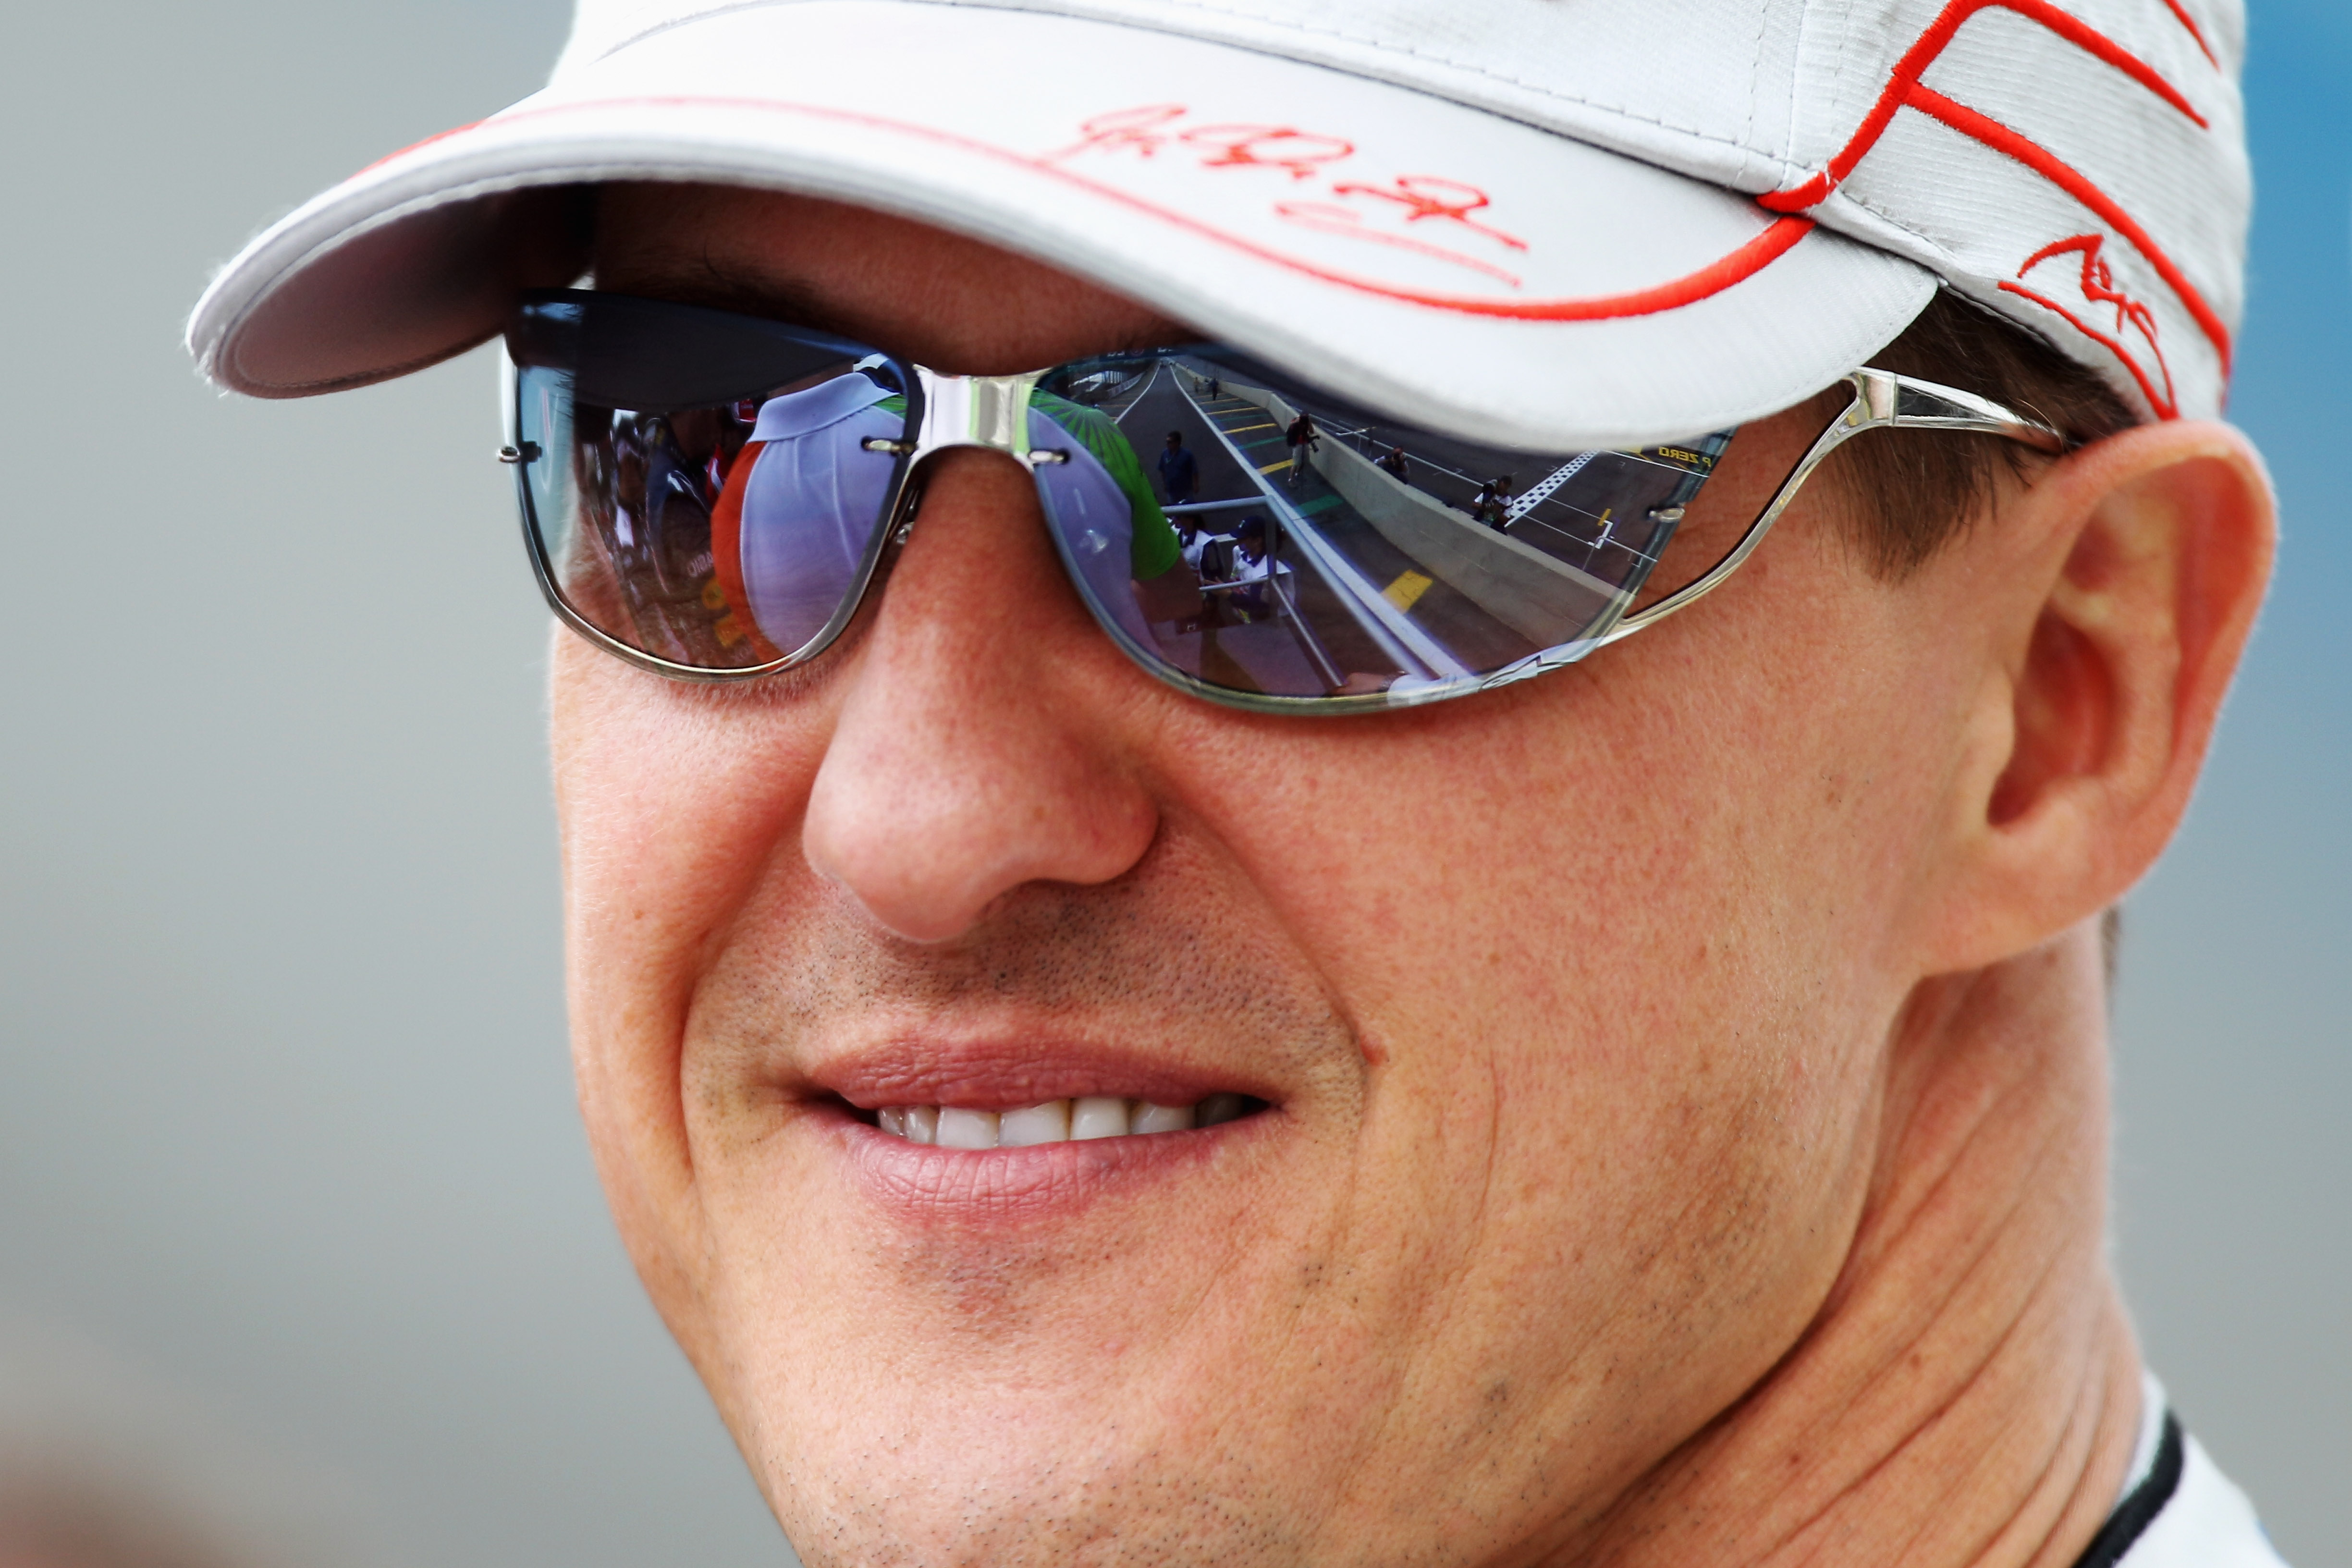 Michael Schumacher on November 27, 2011 in Sao Paulo, Brazil. | Source: Getty Images